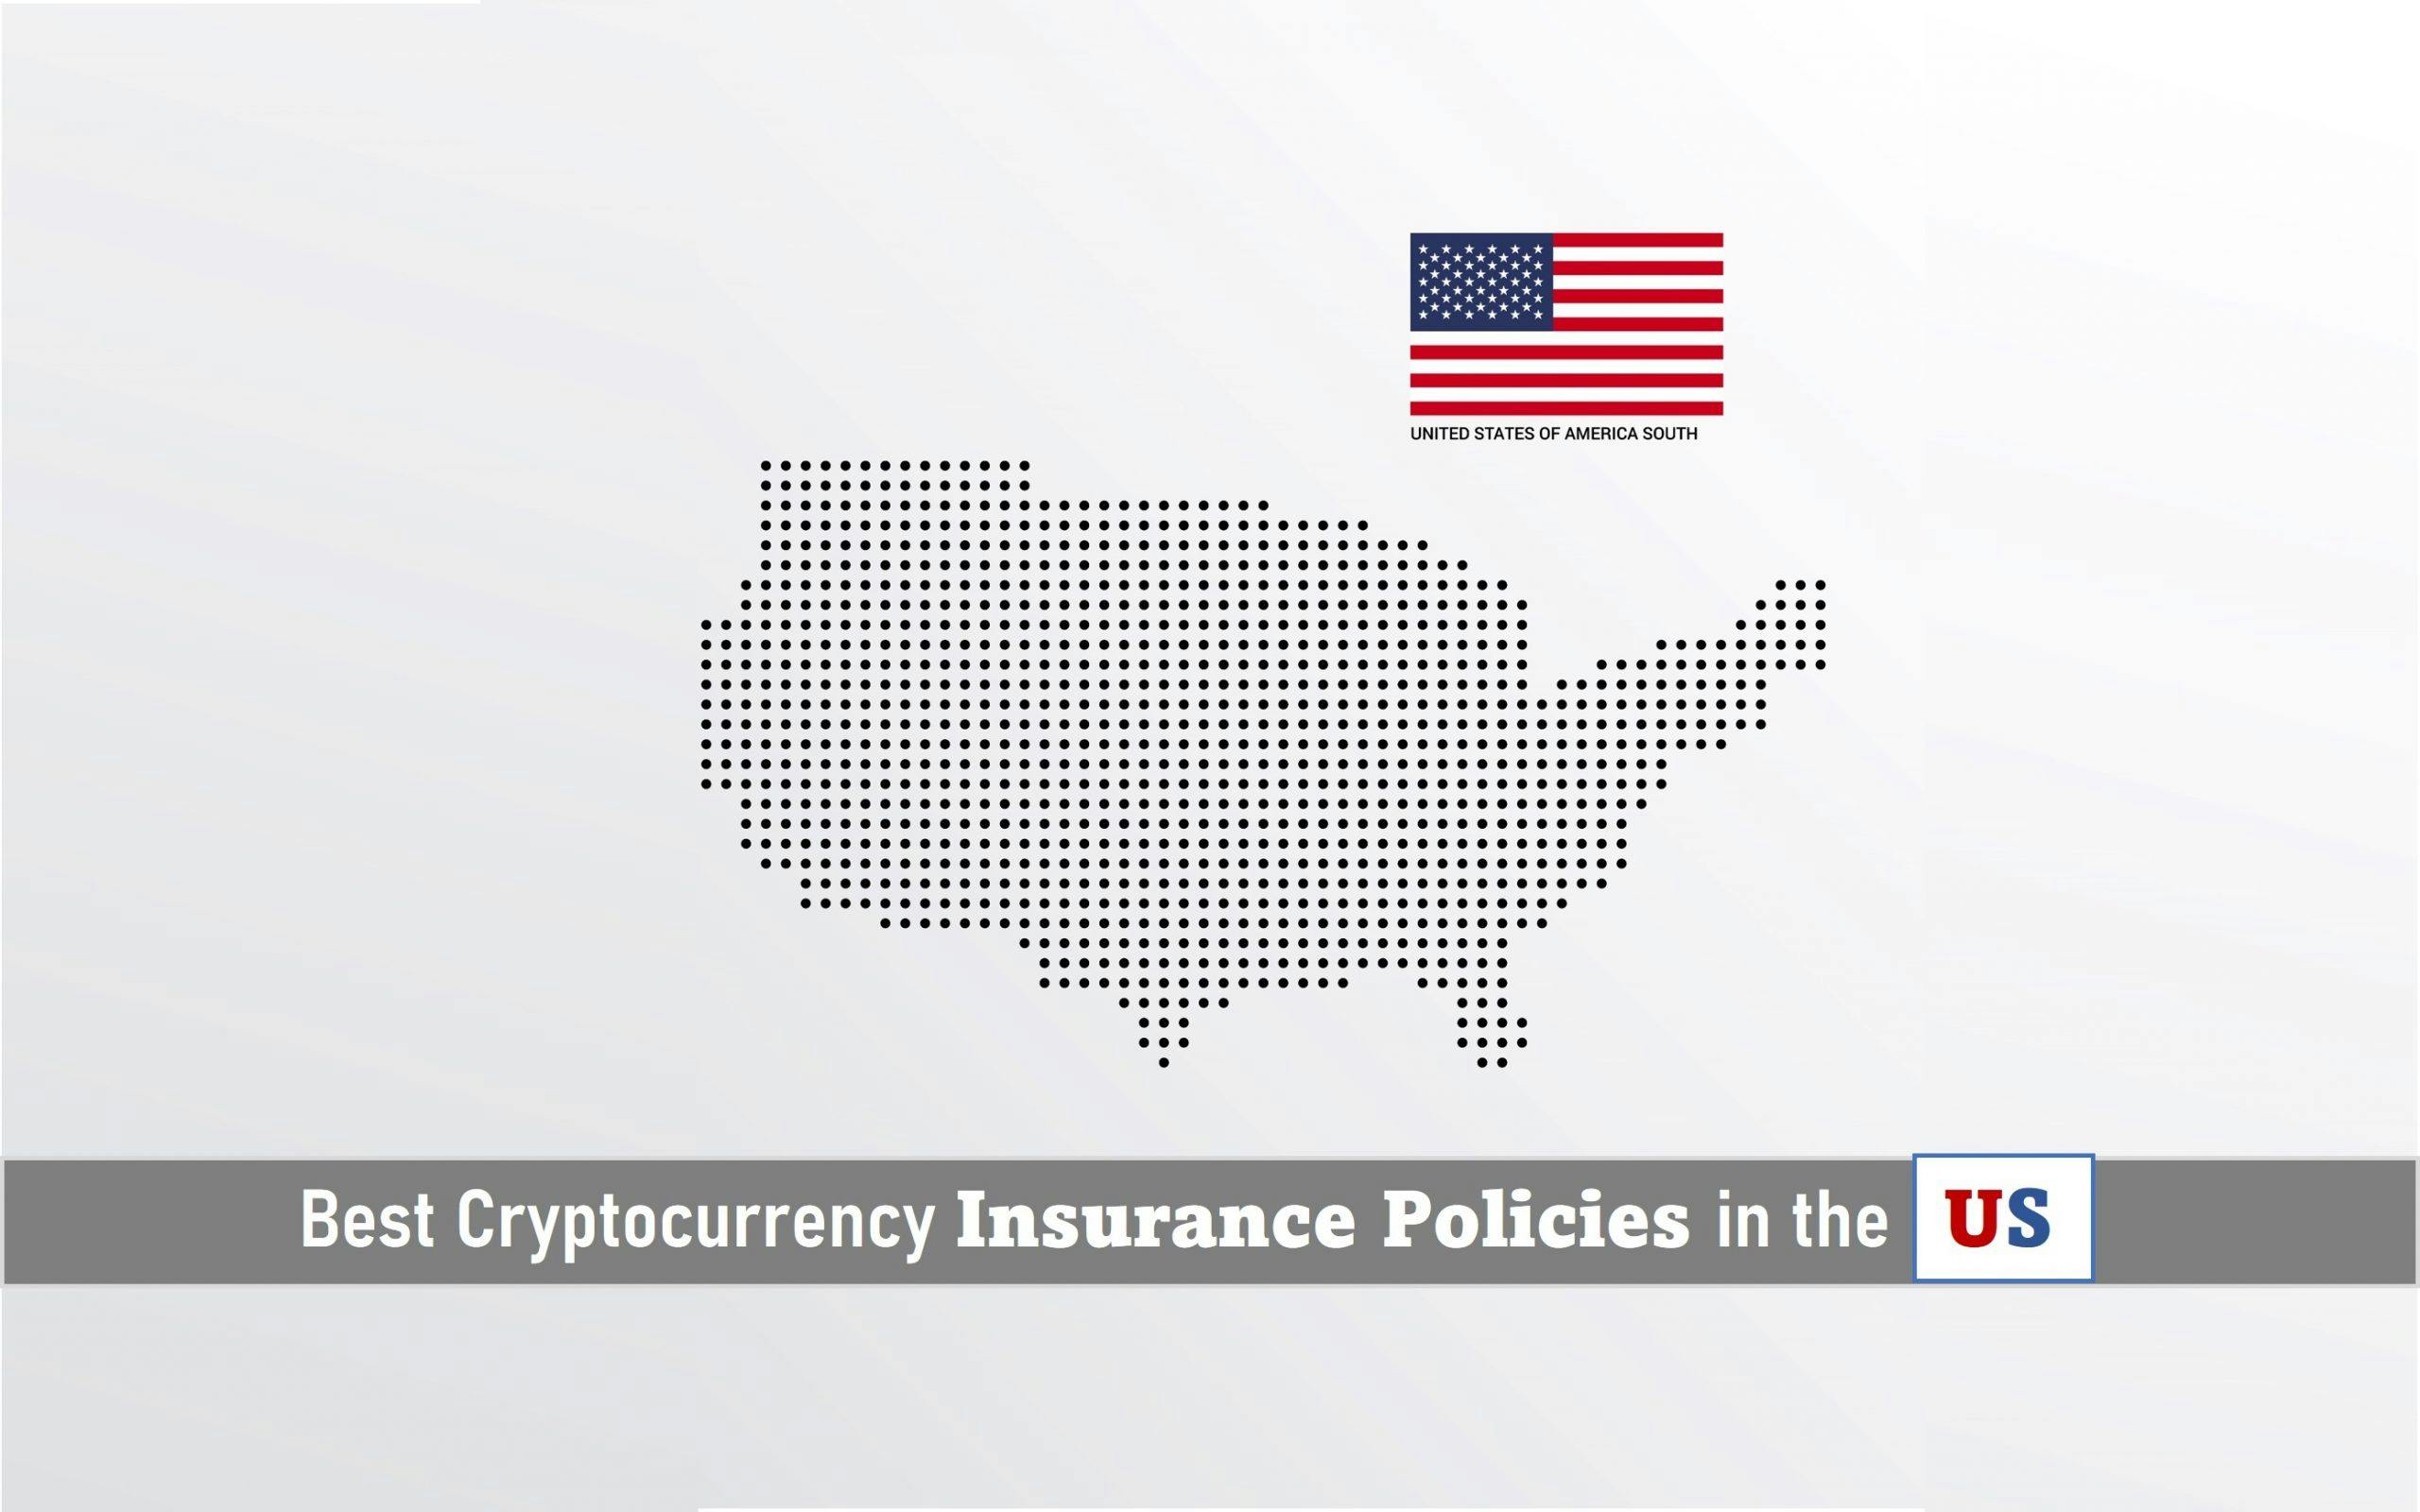 Best Cryptocurrency Insurance Policies in the US